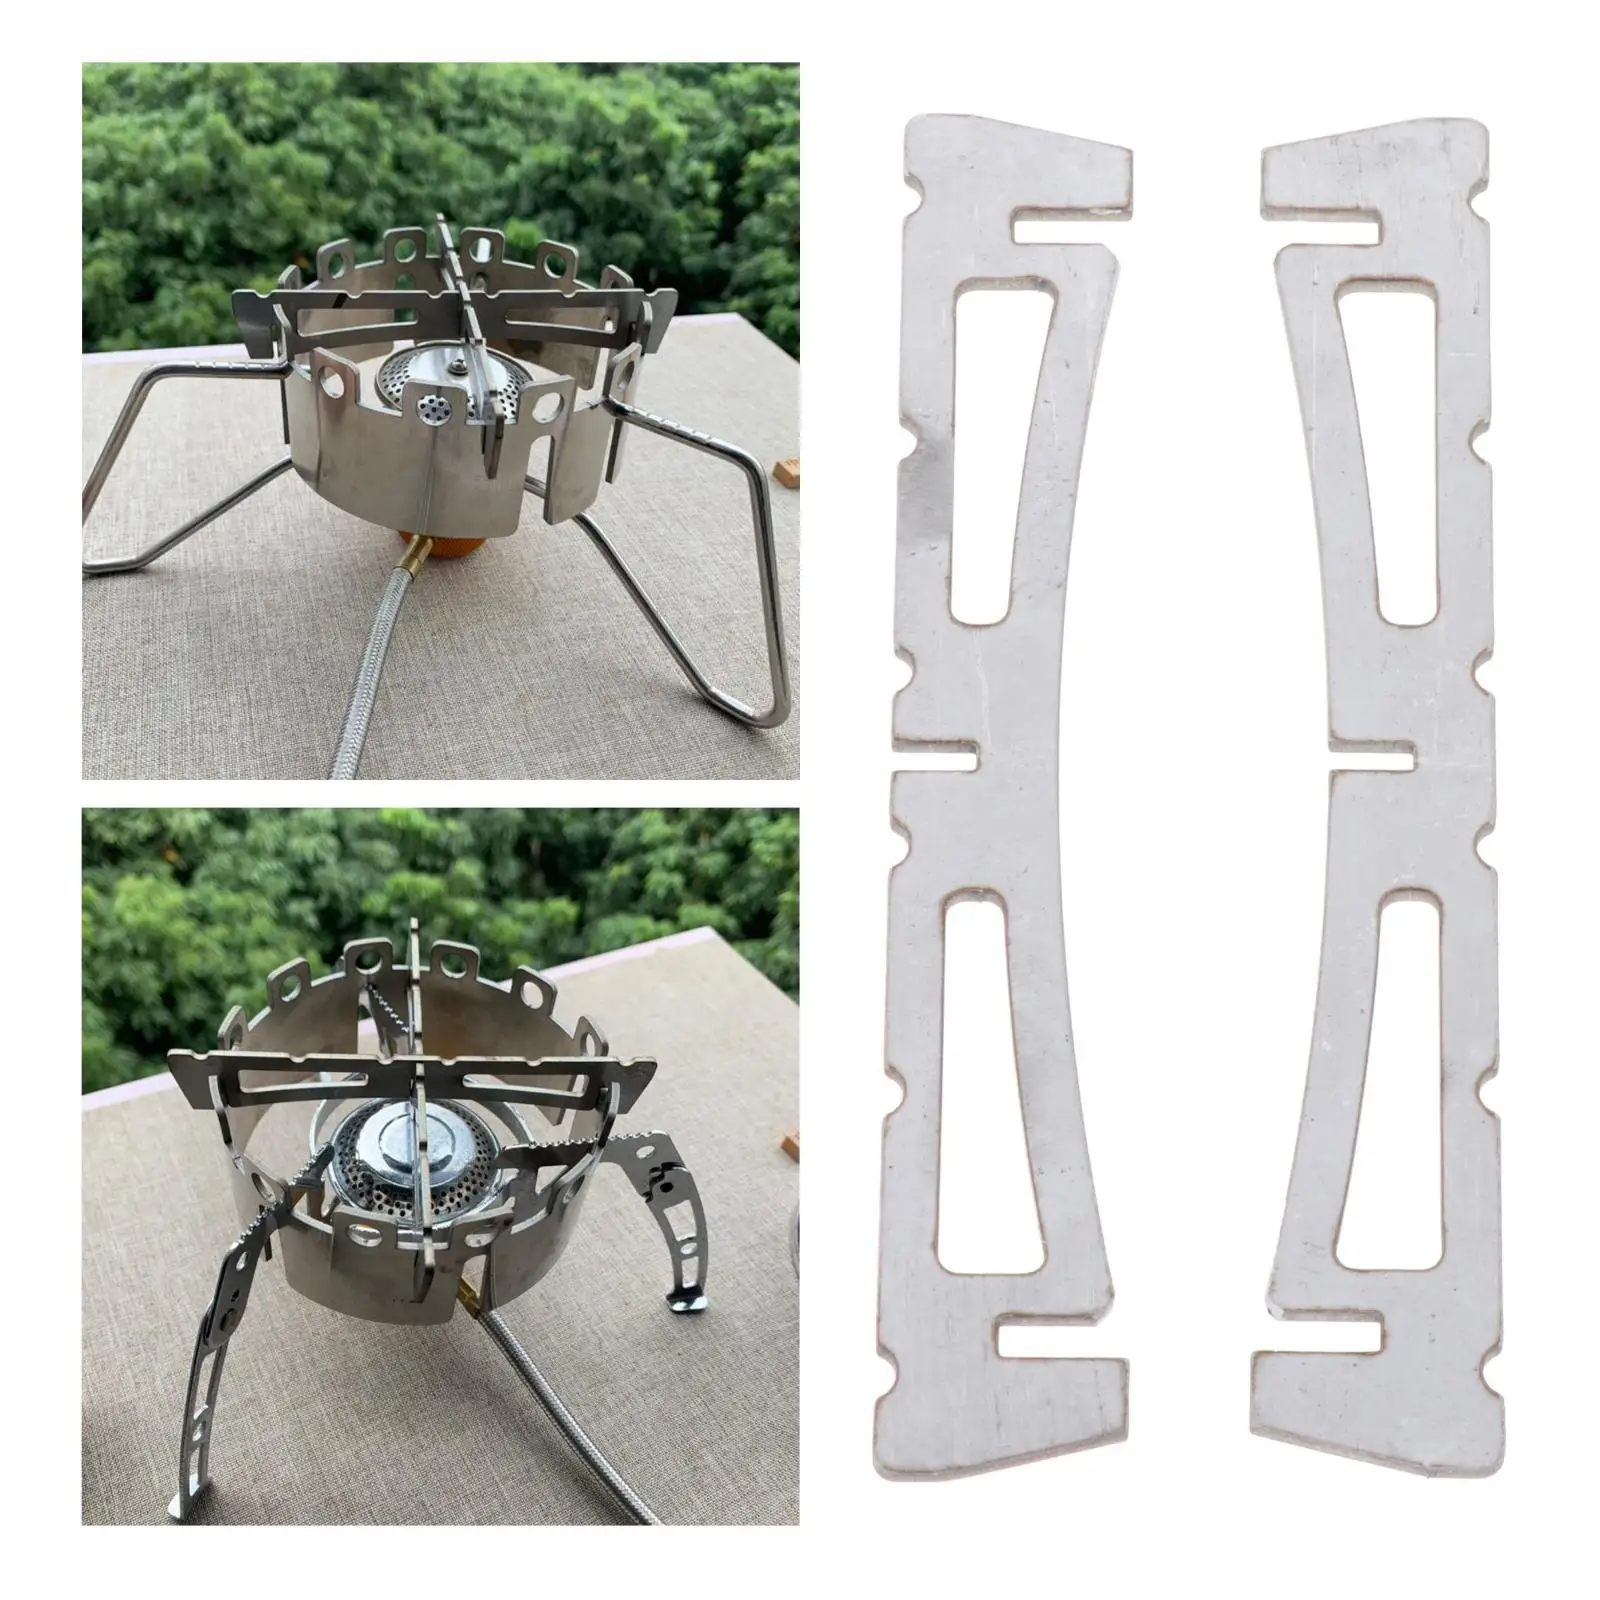 Mini Alcohol Stove Cross Stand Foldable Rack Ultralight 304 Burner Stand Stove Shelf for Camping Outdoor Hiking BBQ Picnic